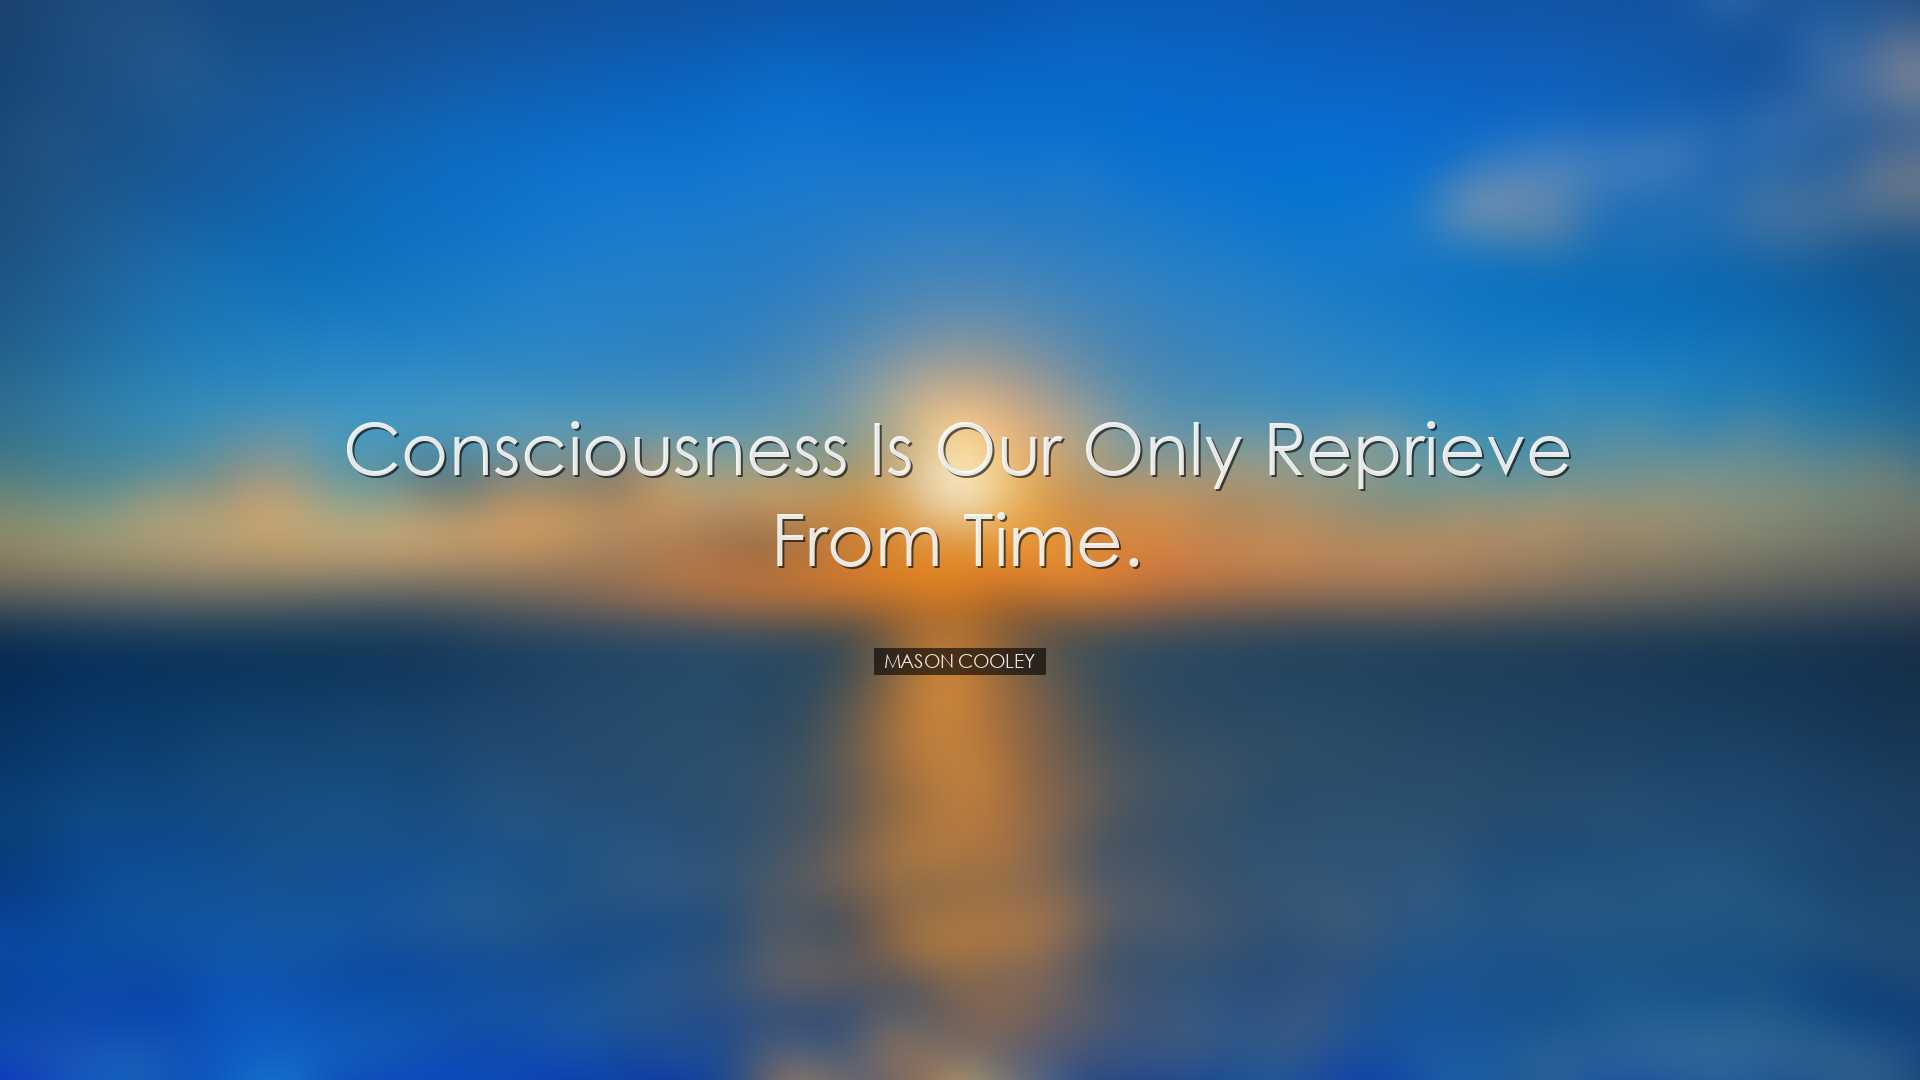 Consciousness is our only reprieve from Time. - Mason Cooley